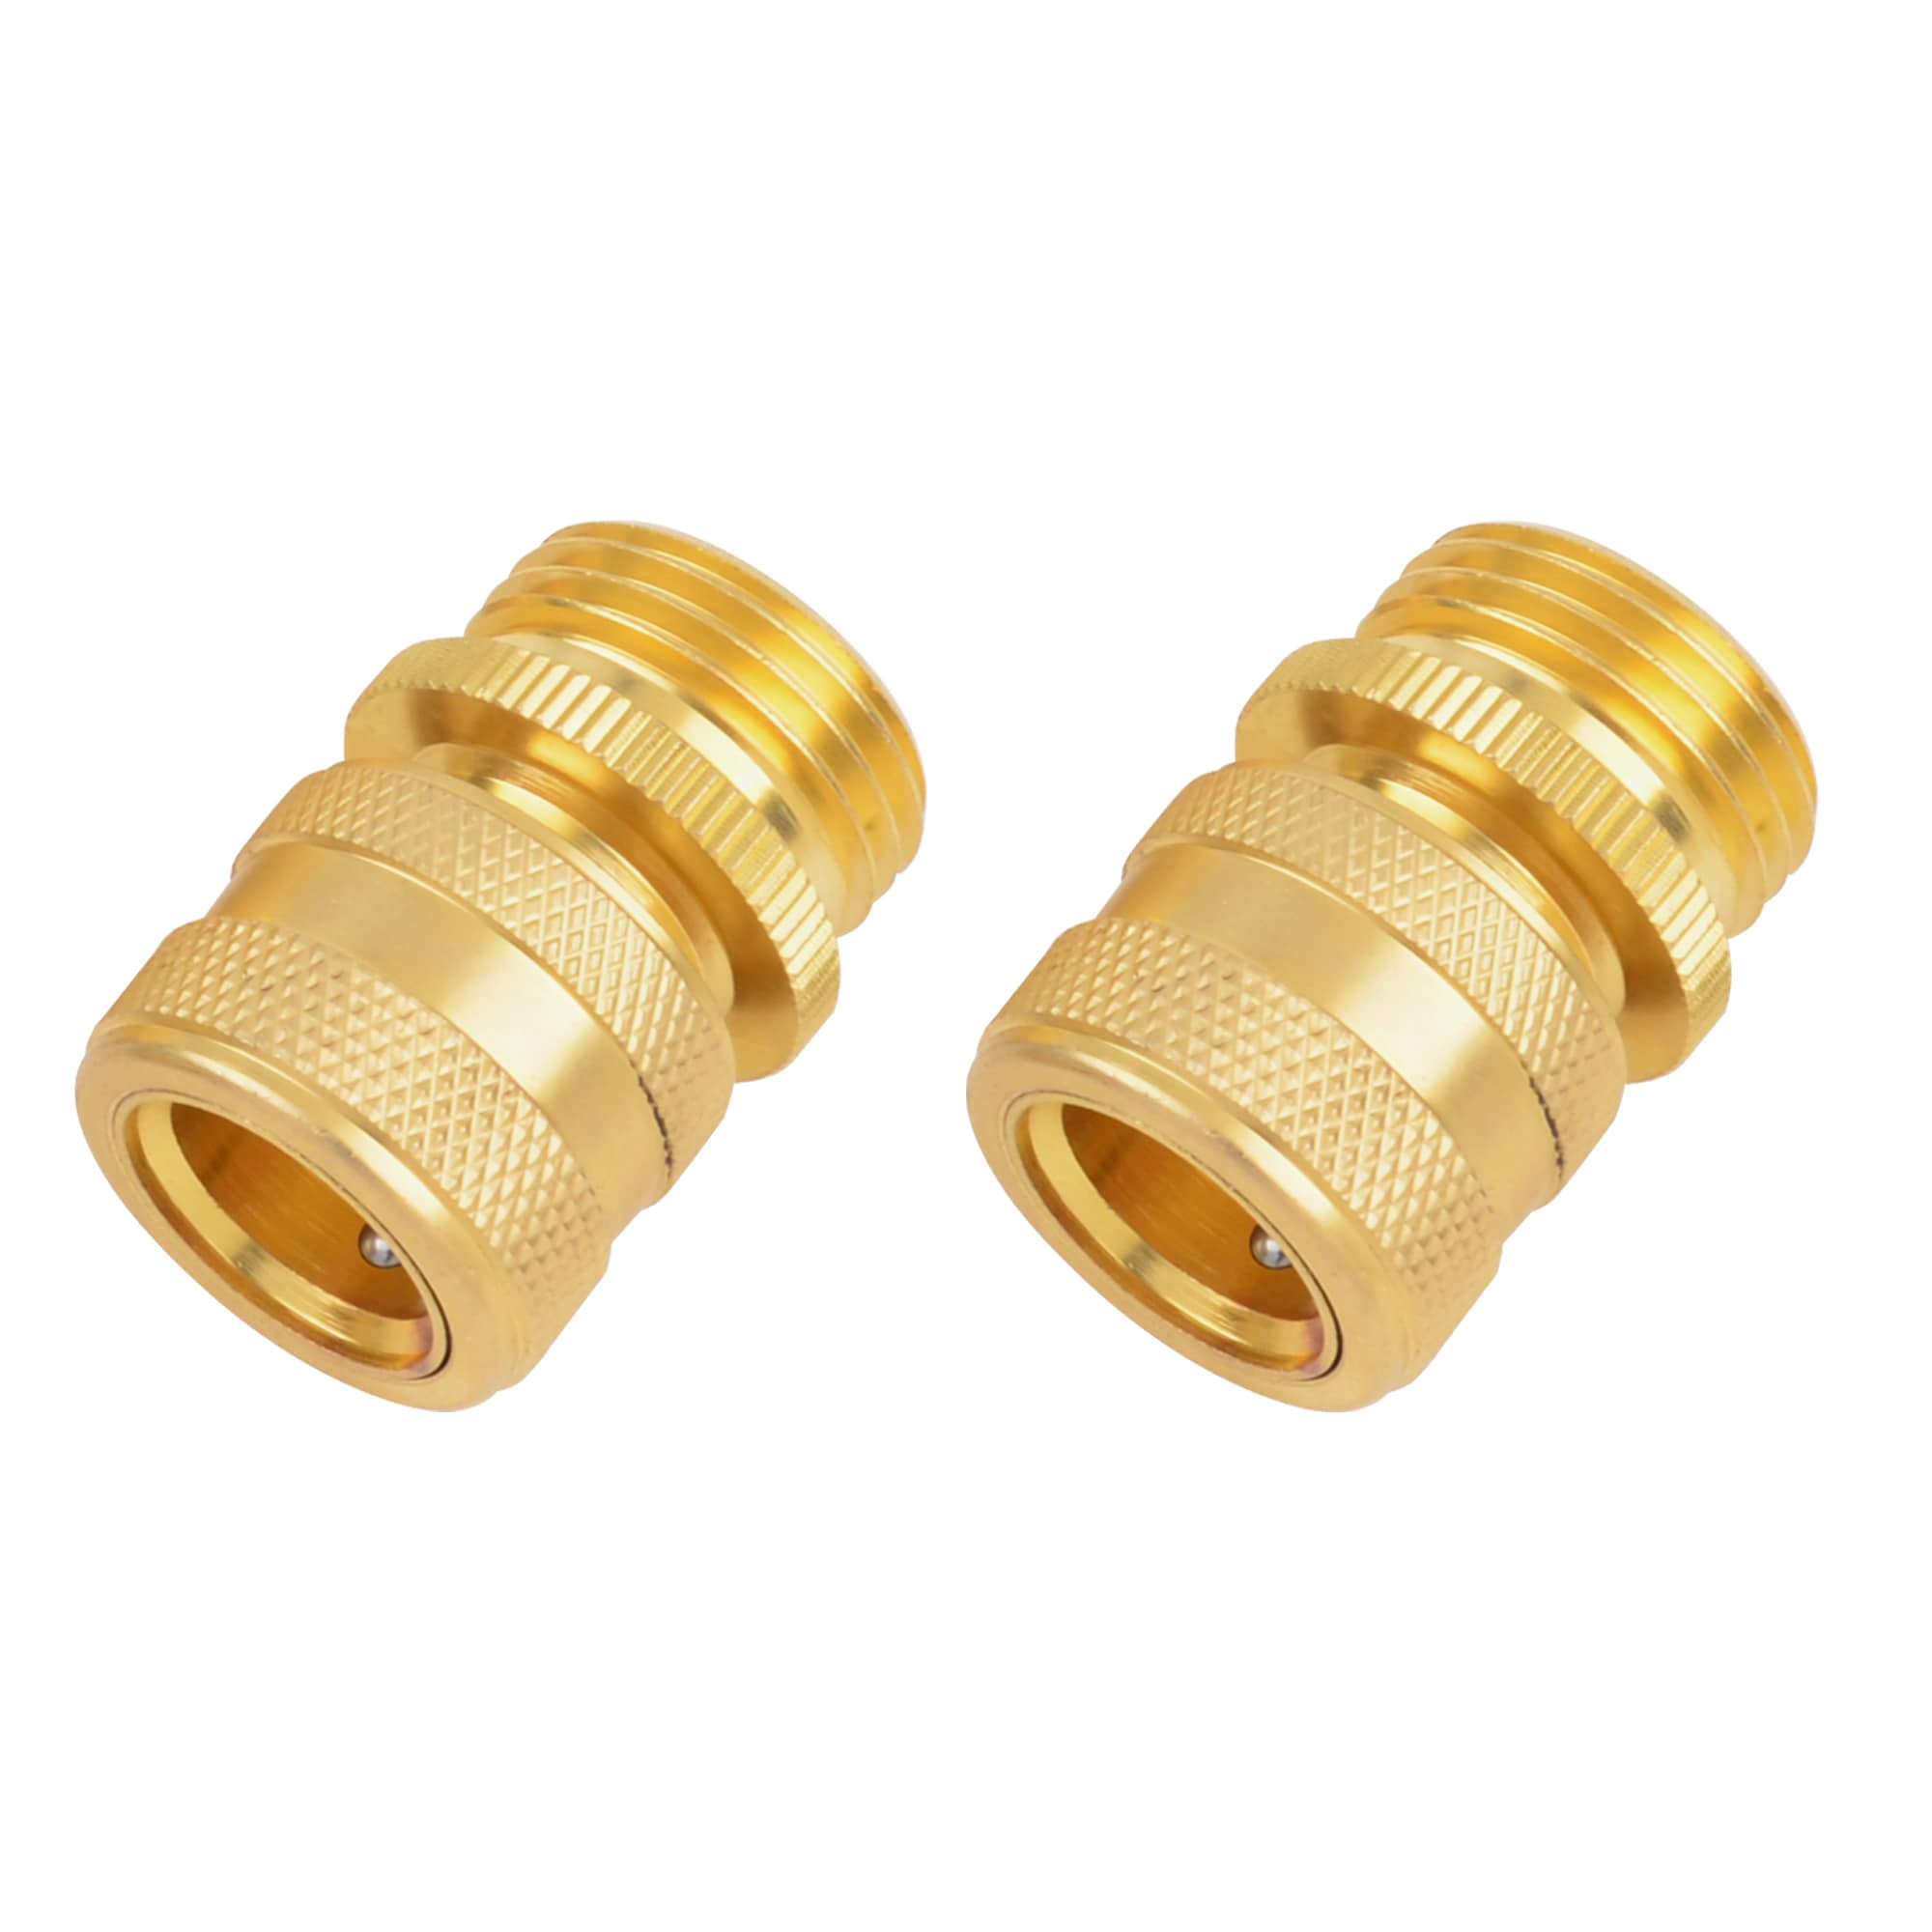 Hose Connector Set Of Garden Hose Fittings. Nozzle, Quick Connector,  Waterproof Connector, Double Male Connectors, Tap Connectors Size 1/2 And  3/4 Inc